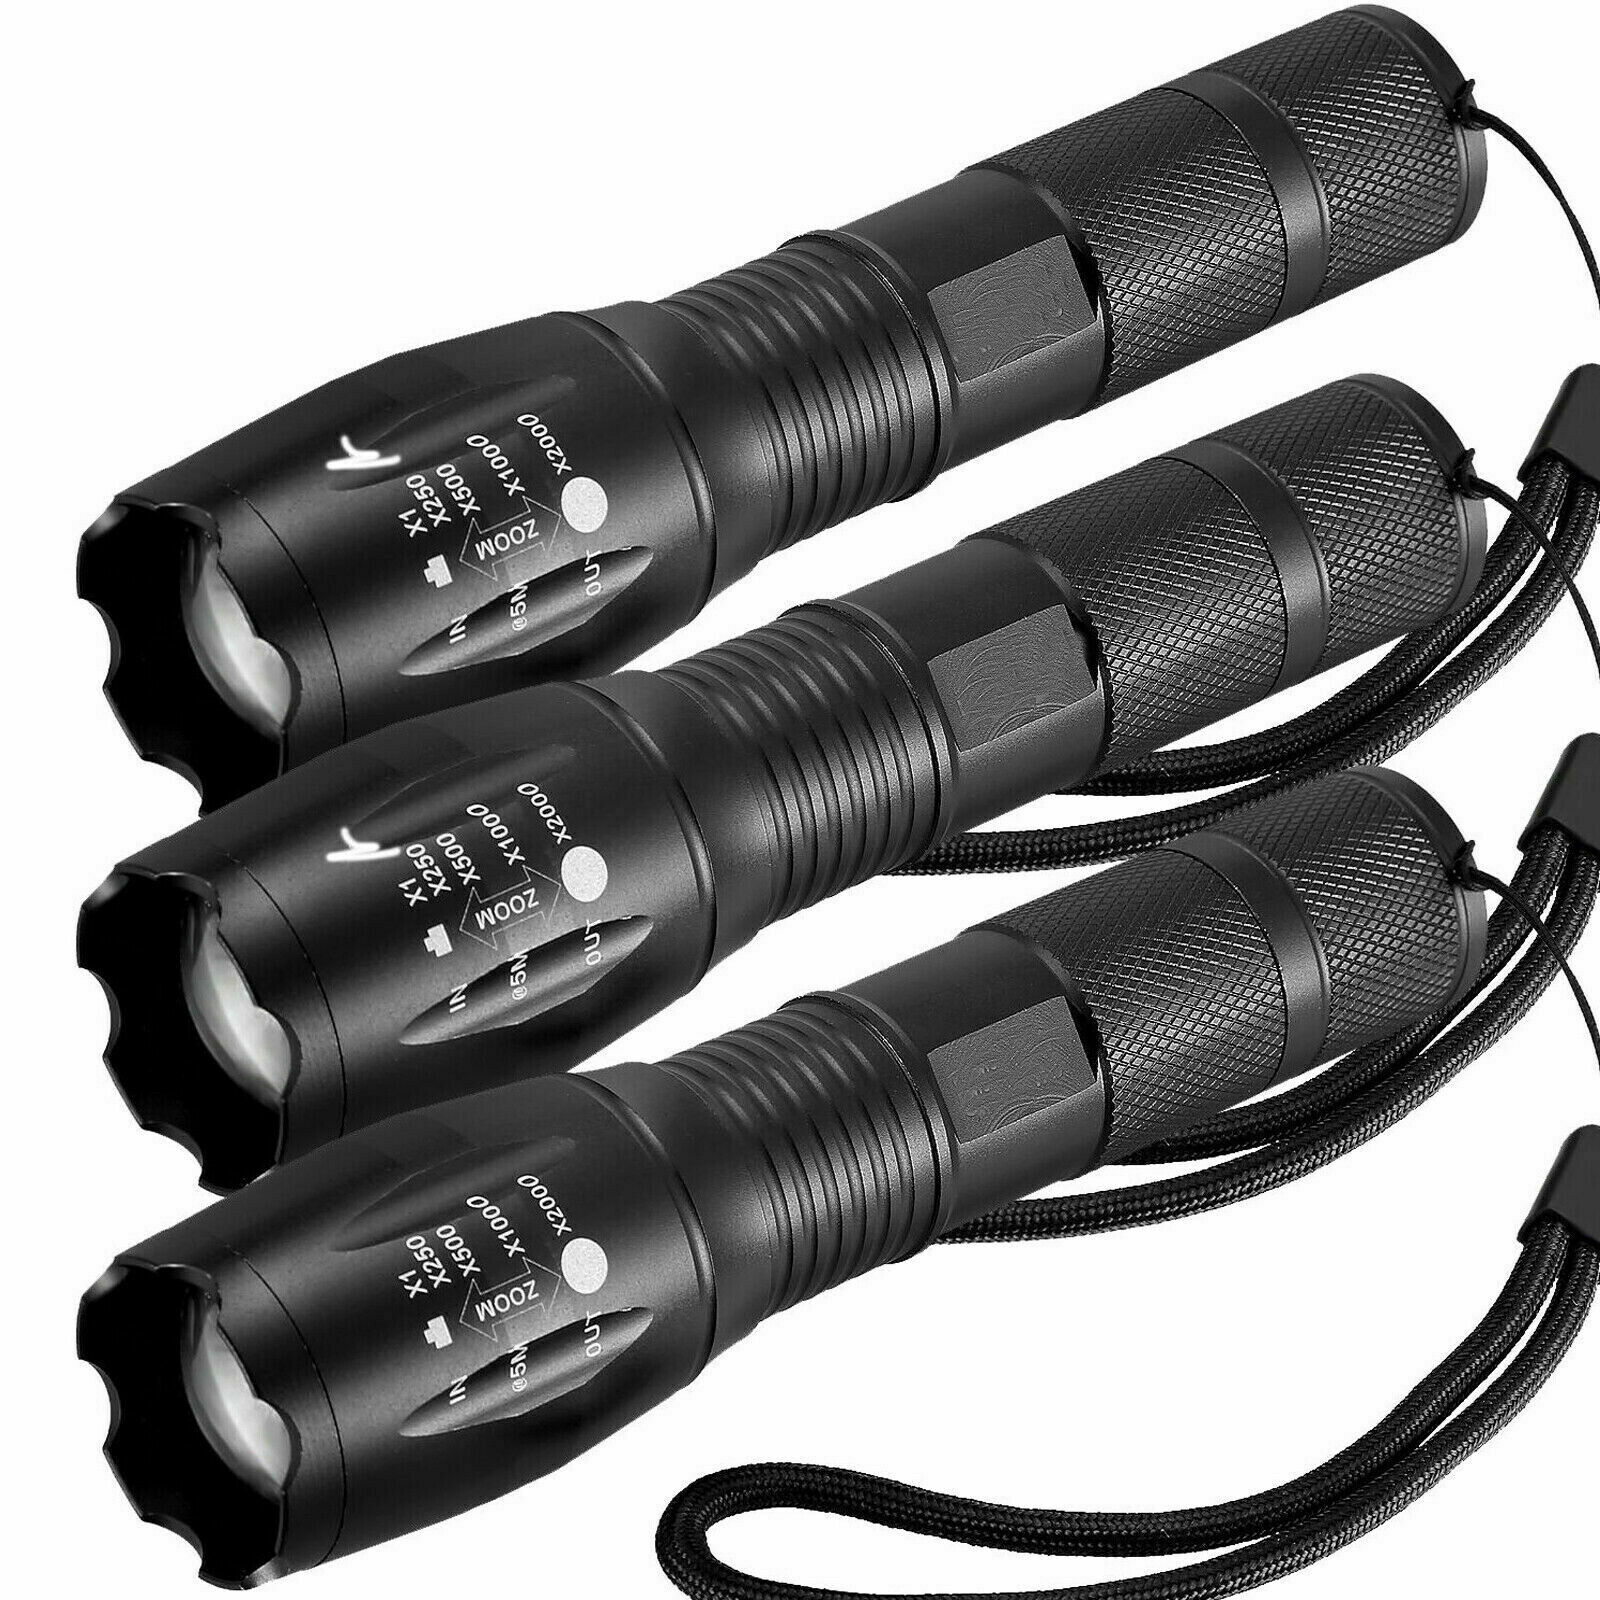 3 x Tactical 18650 Flashlight Ultrafire T6 High Powered 5Modes Zoomable Aluminum